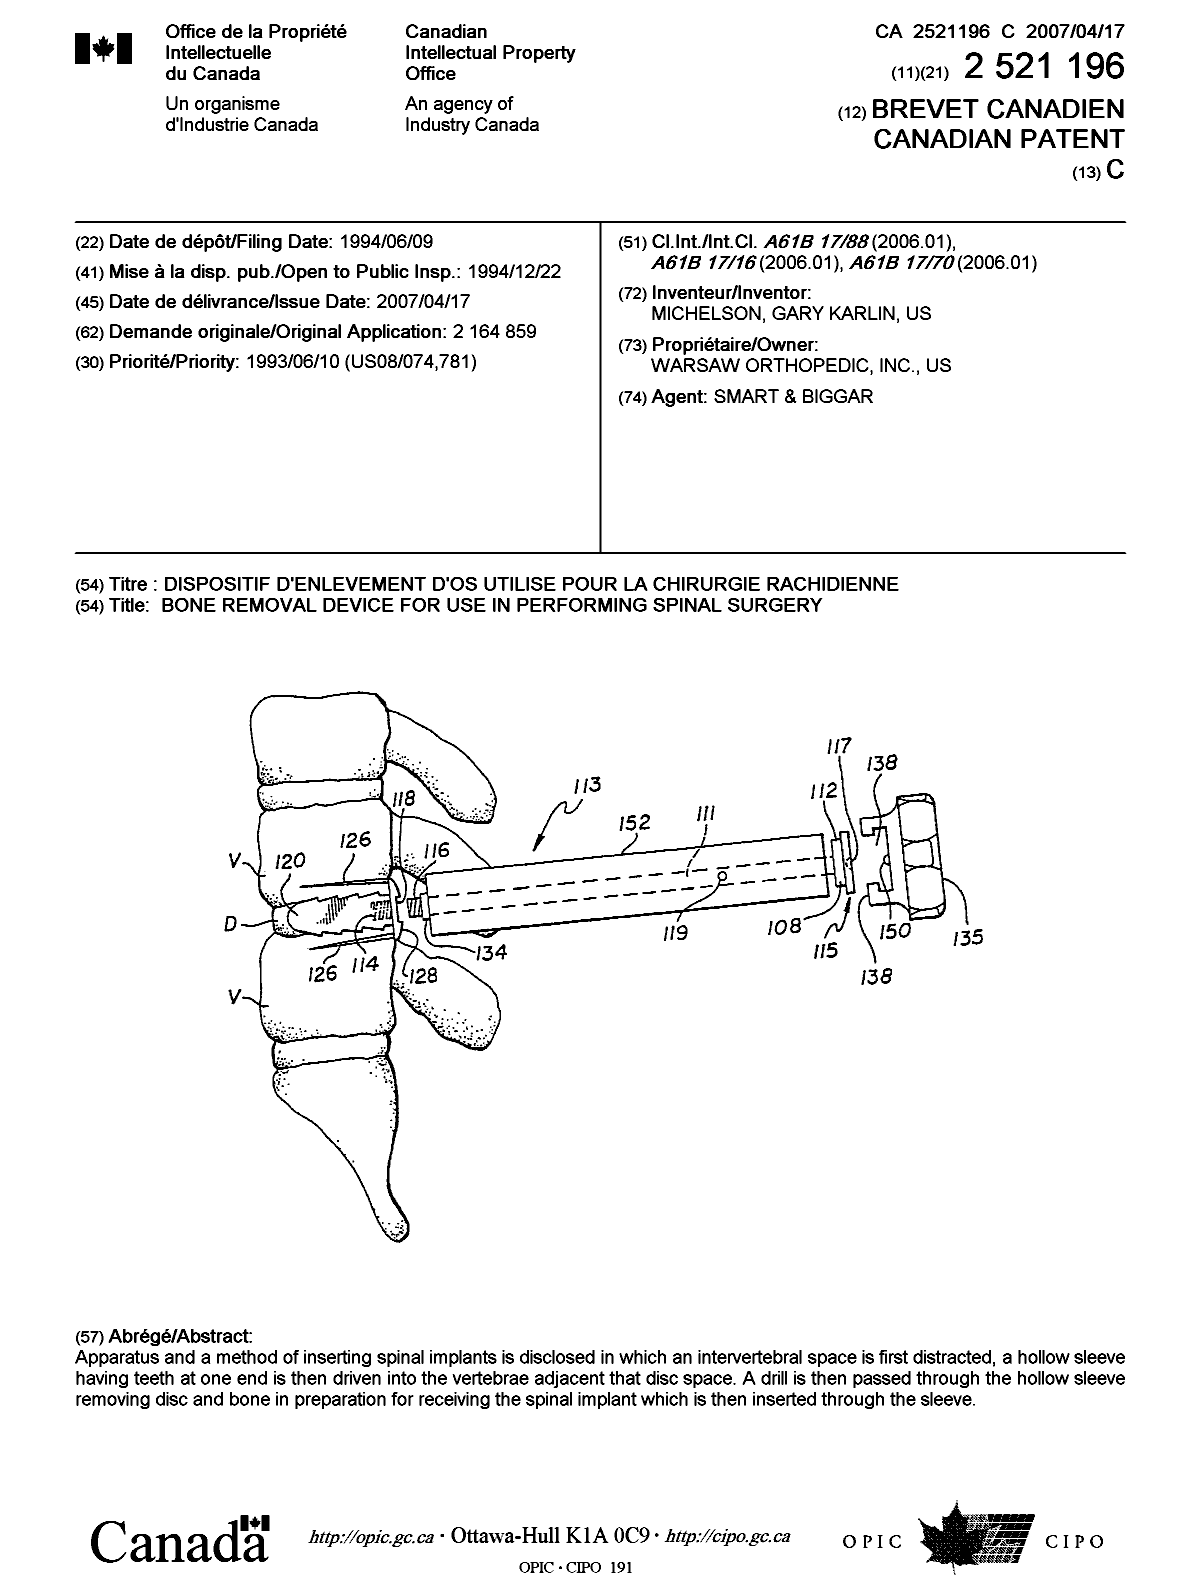 Canadian Patent Document 2521196. Cover Page 20061203. Image 1 of 1